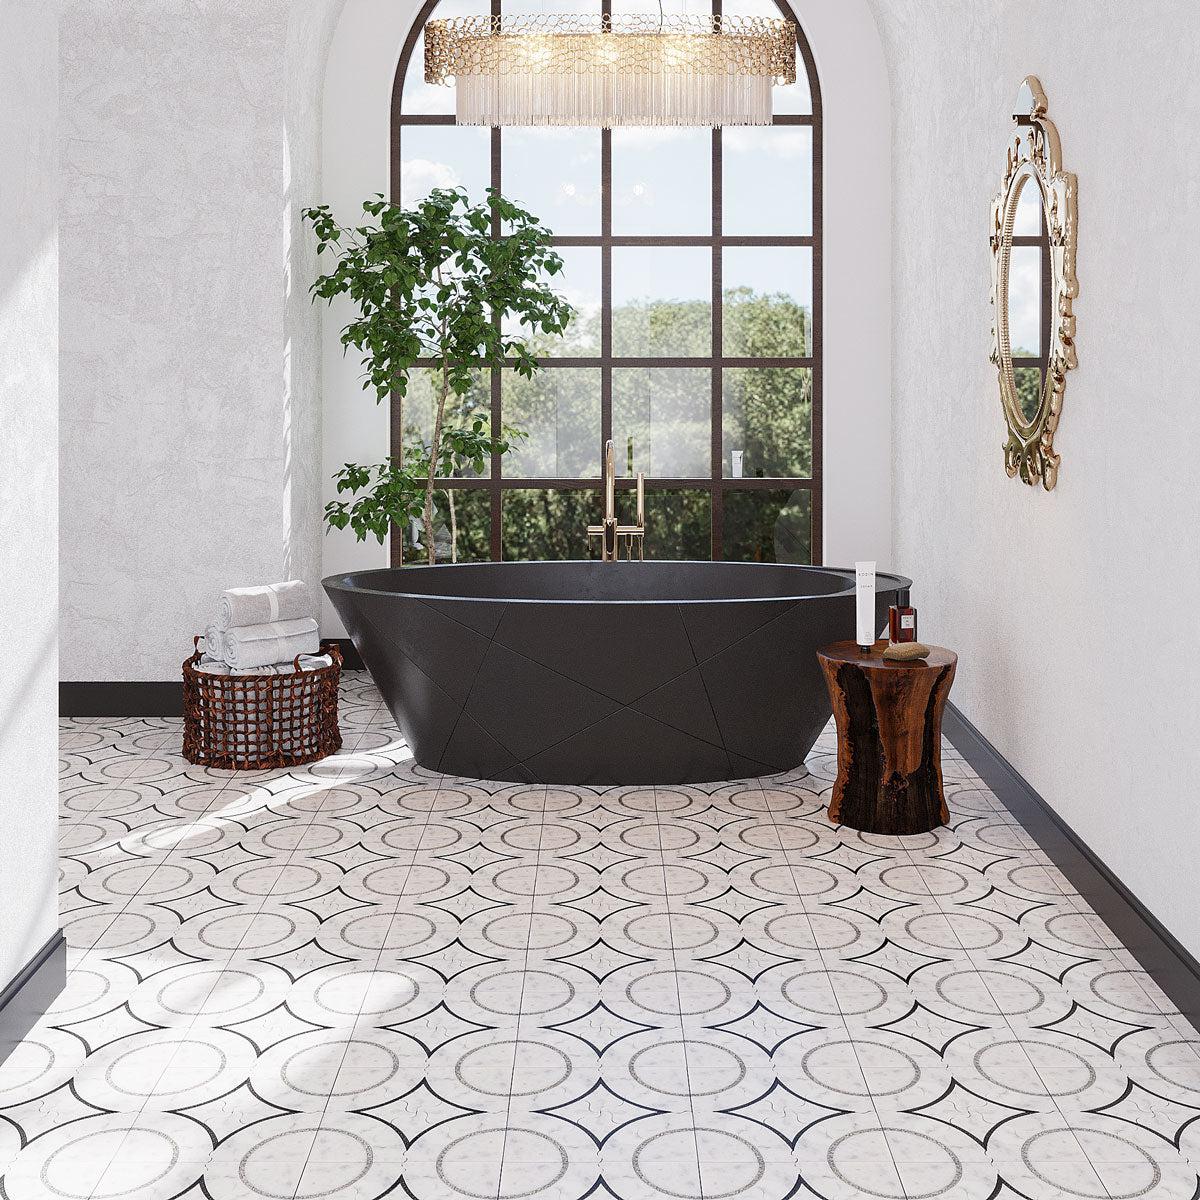 Dramatic black and white bathroom with waterjet mosaic floor tiles